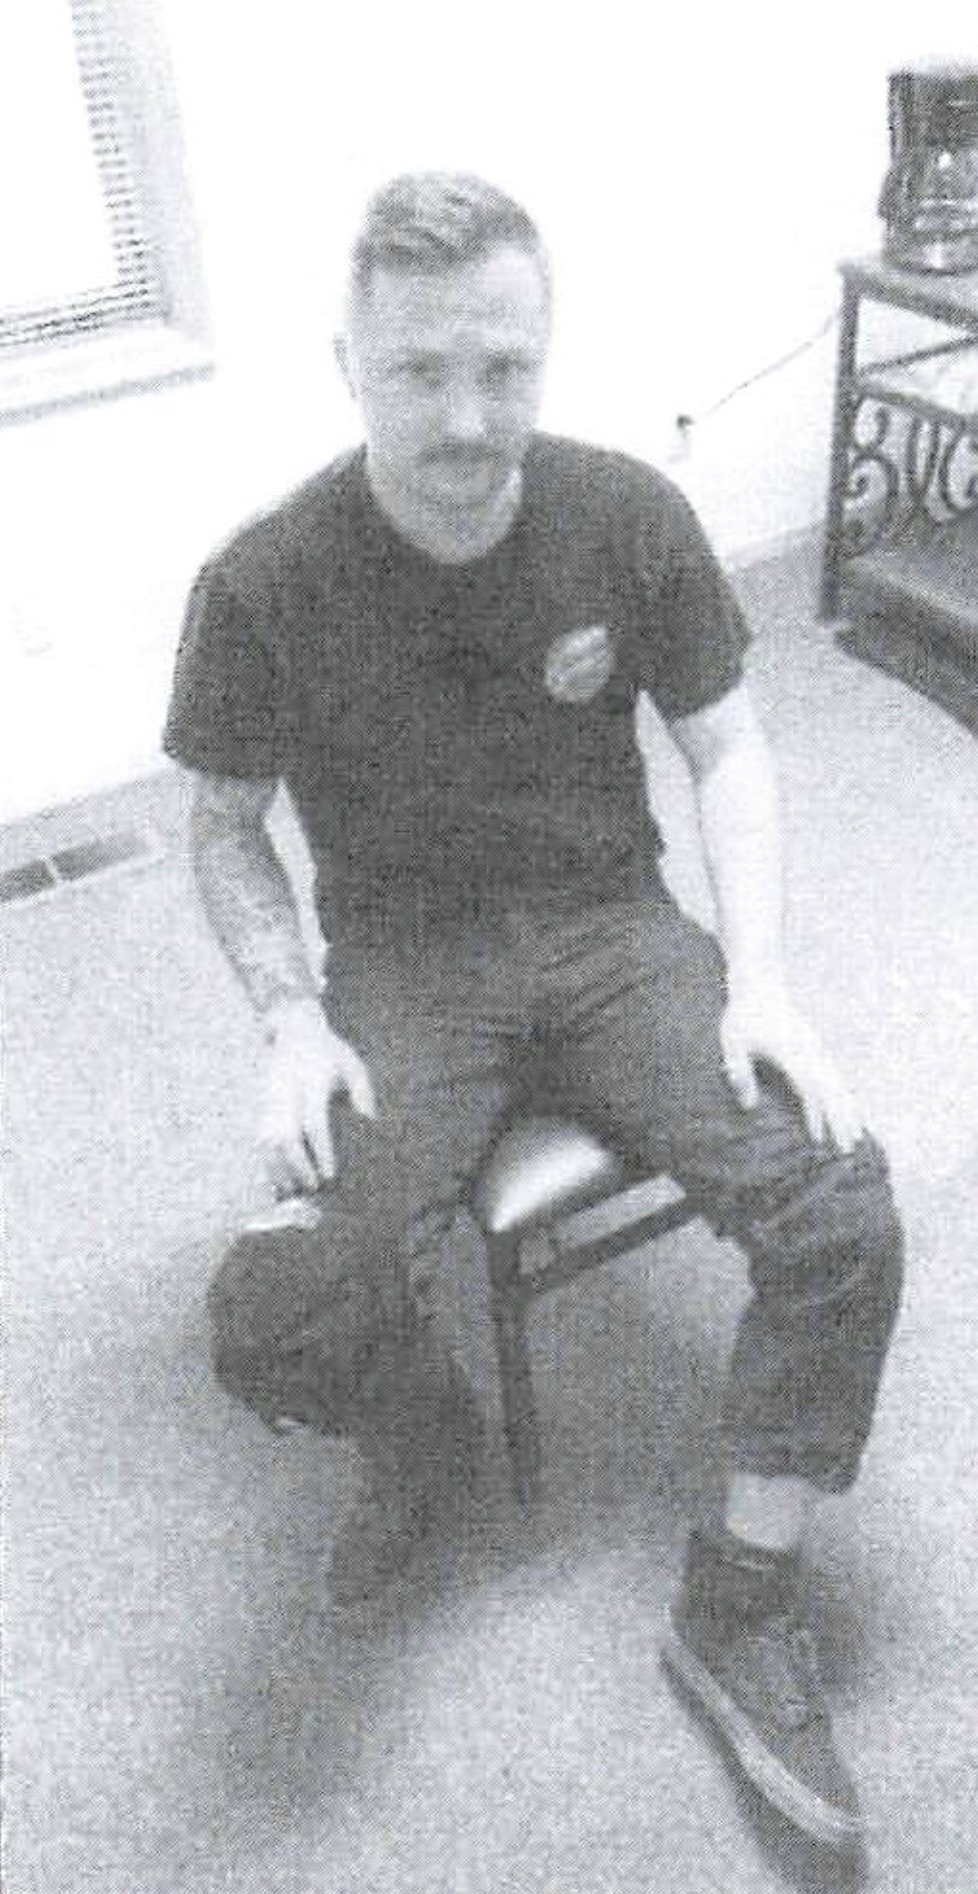 A grayscale photocopied photograph of a young man with short hair with a neutral expression as he sits on a chair in a sparsely furnished room. He is wearing a black t-shirt with a logo, and his jeans are rolled up to show an ankle monitor on his right leg.